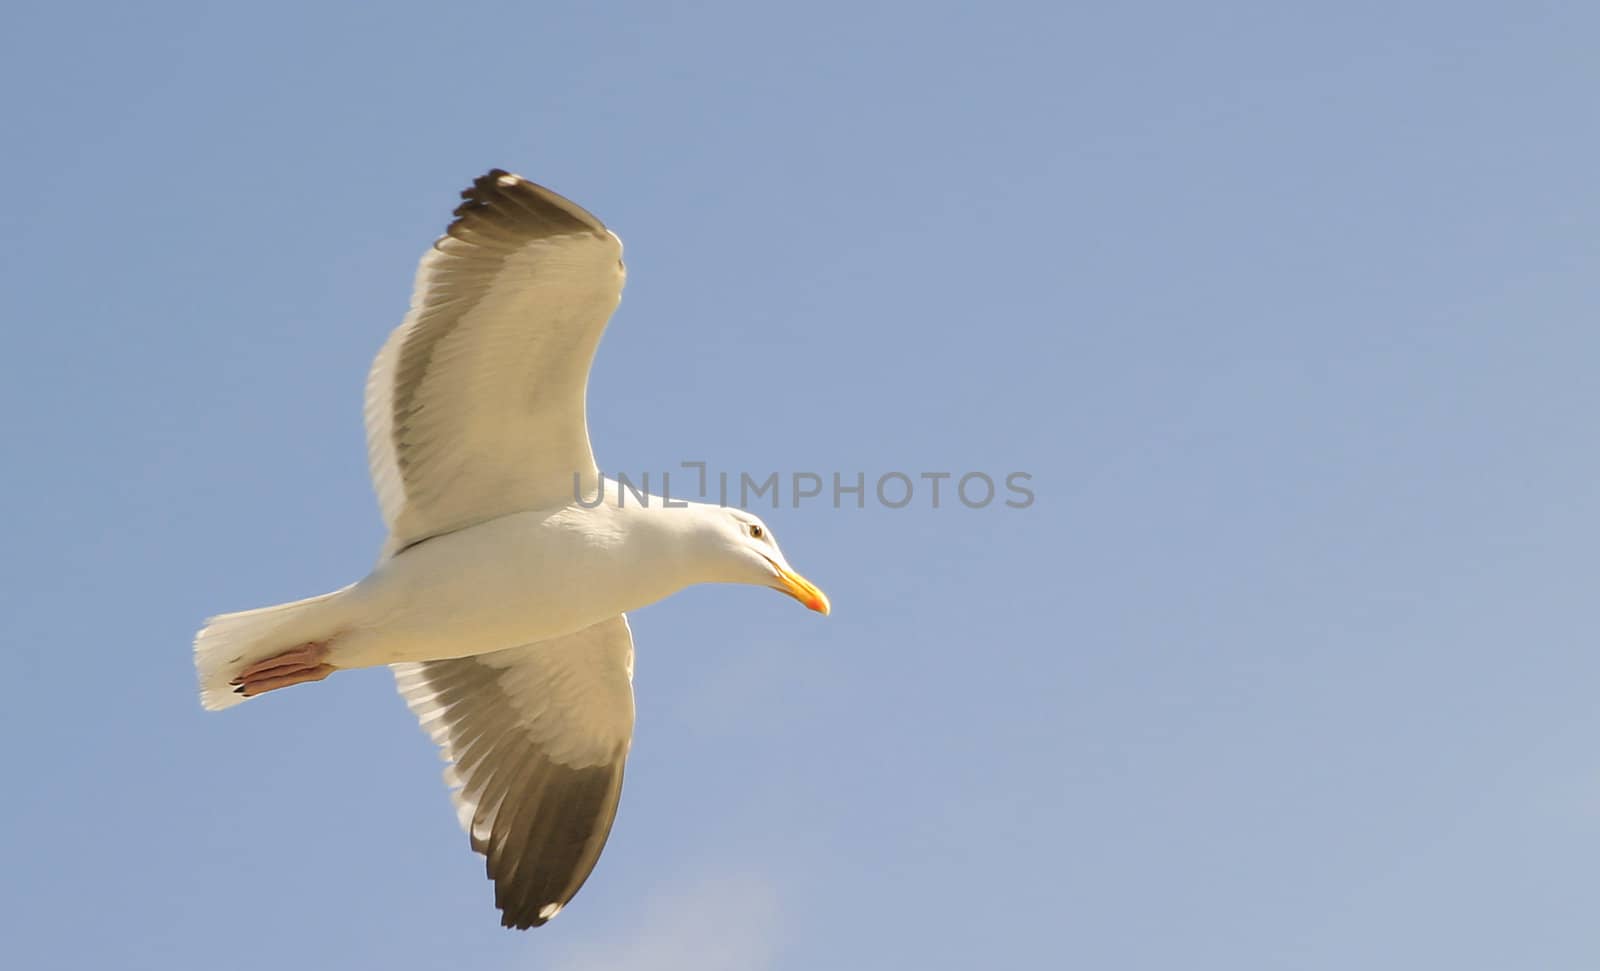 Seagull gliding with the blue sky as a background.